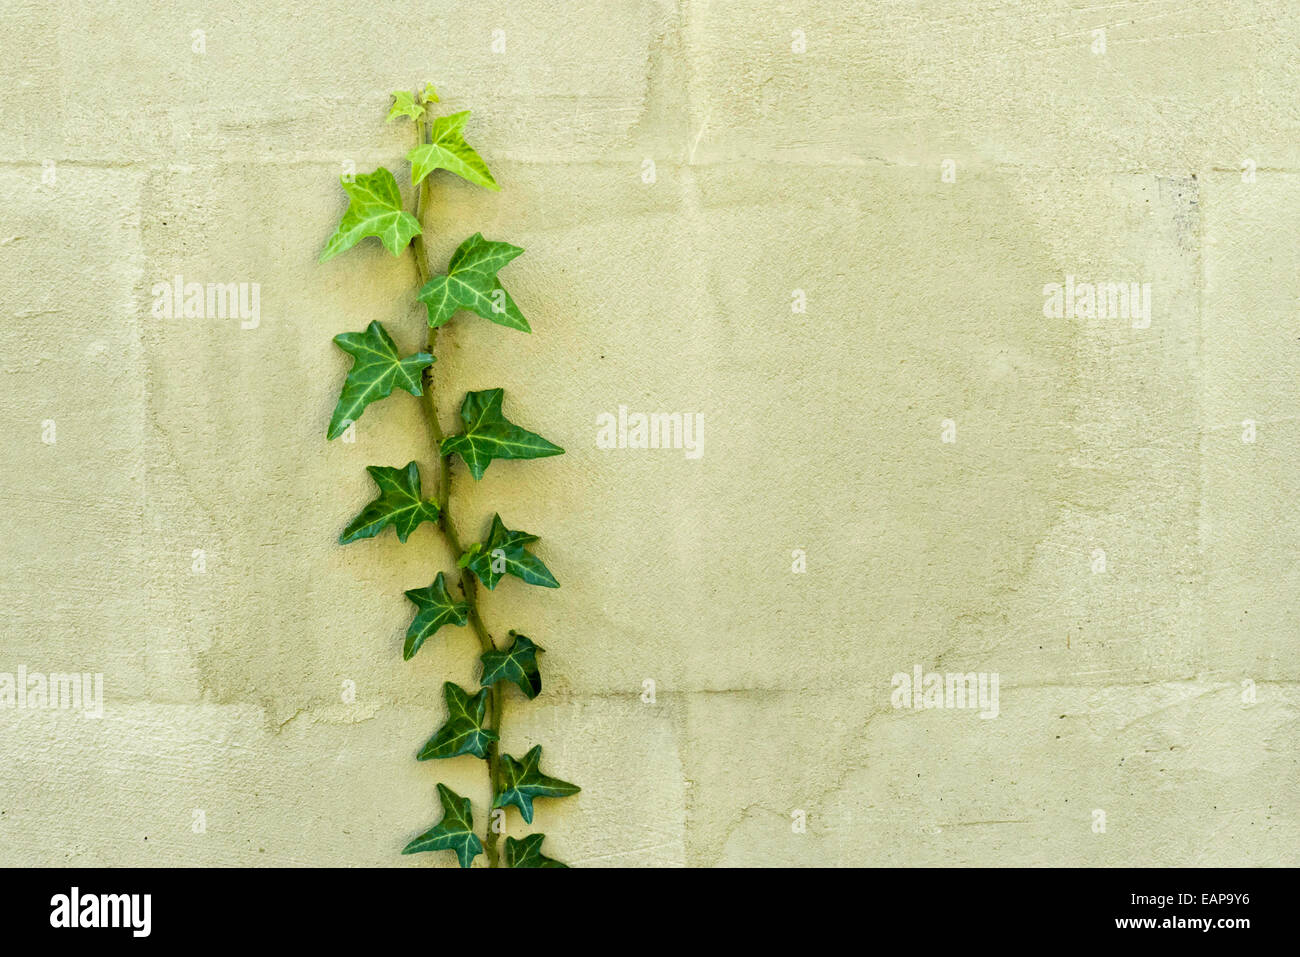 ivy plant growing on a wall Stock Photo